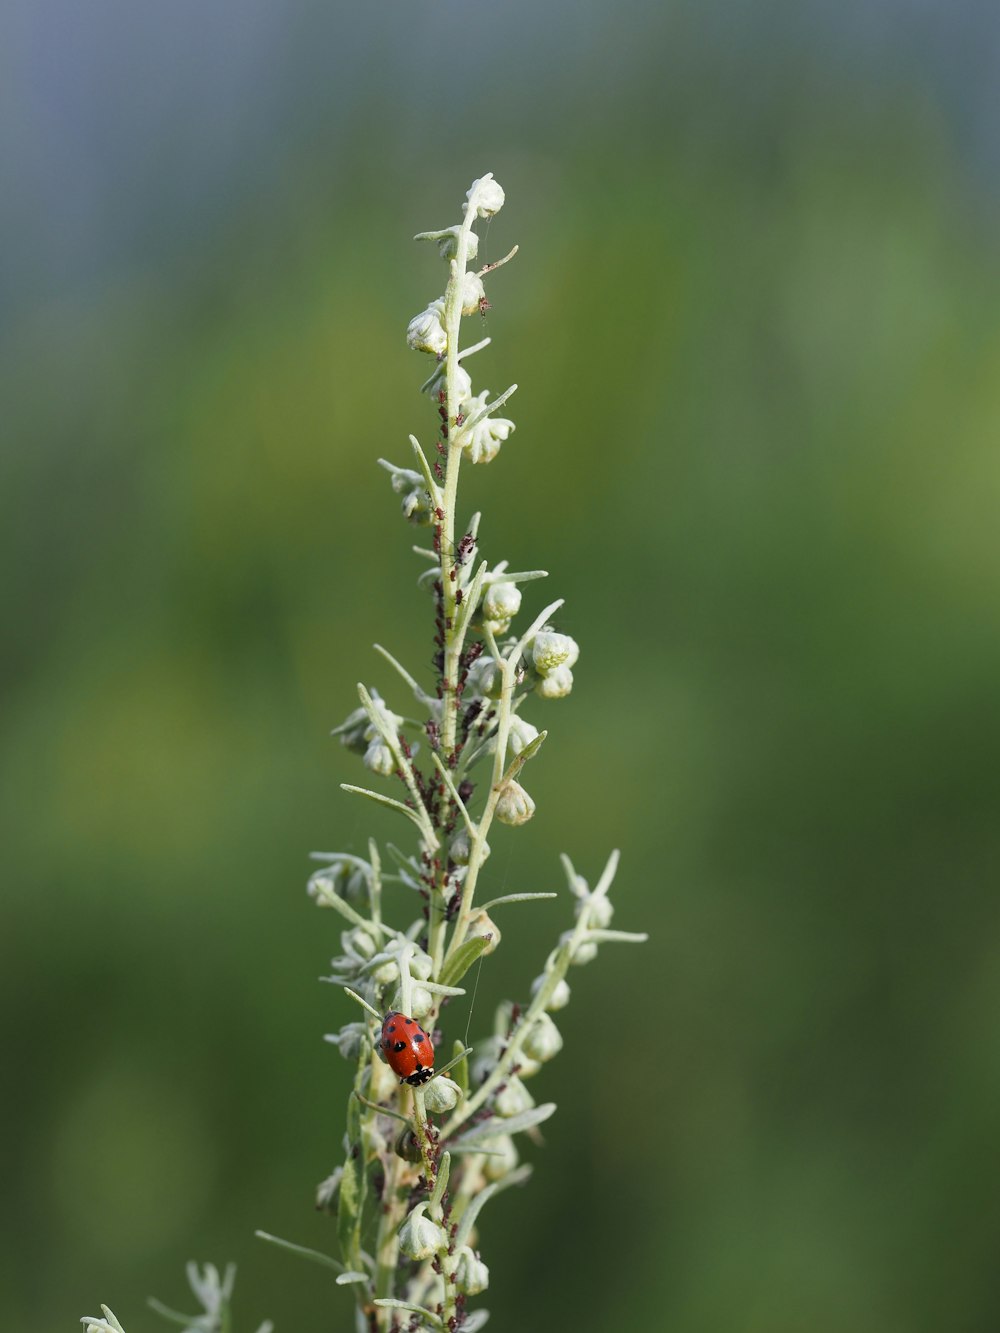 a ladybug sitting on top of a plant with white flowers